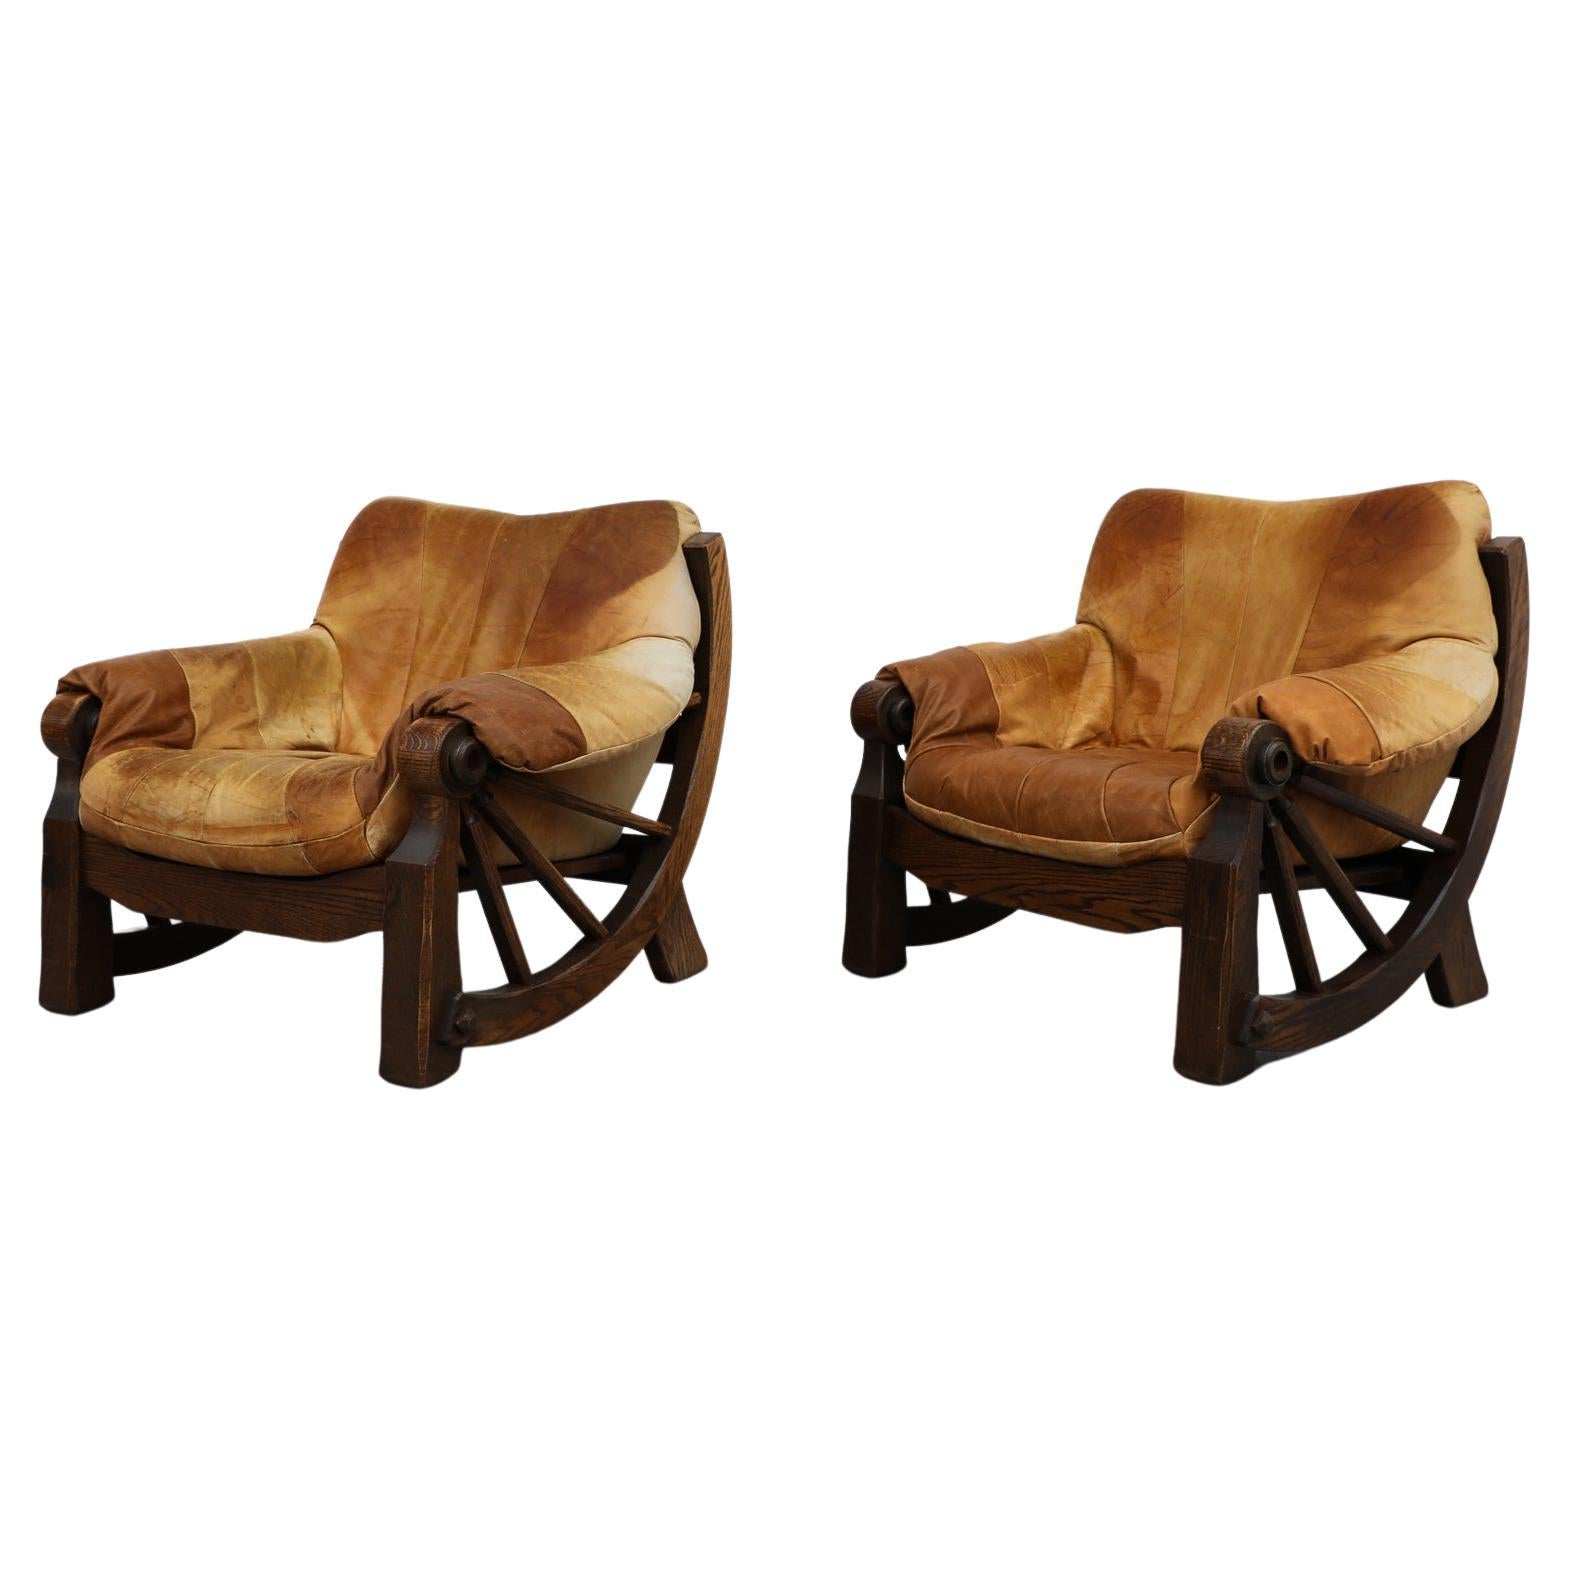 Pair of Mid-Century Brutalist Western Style Leather Patchwork Lounge Chairs